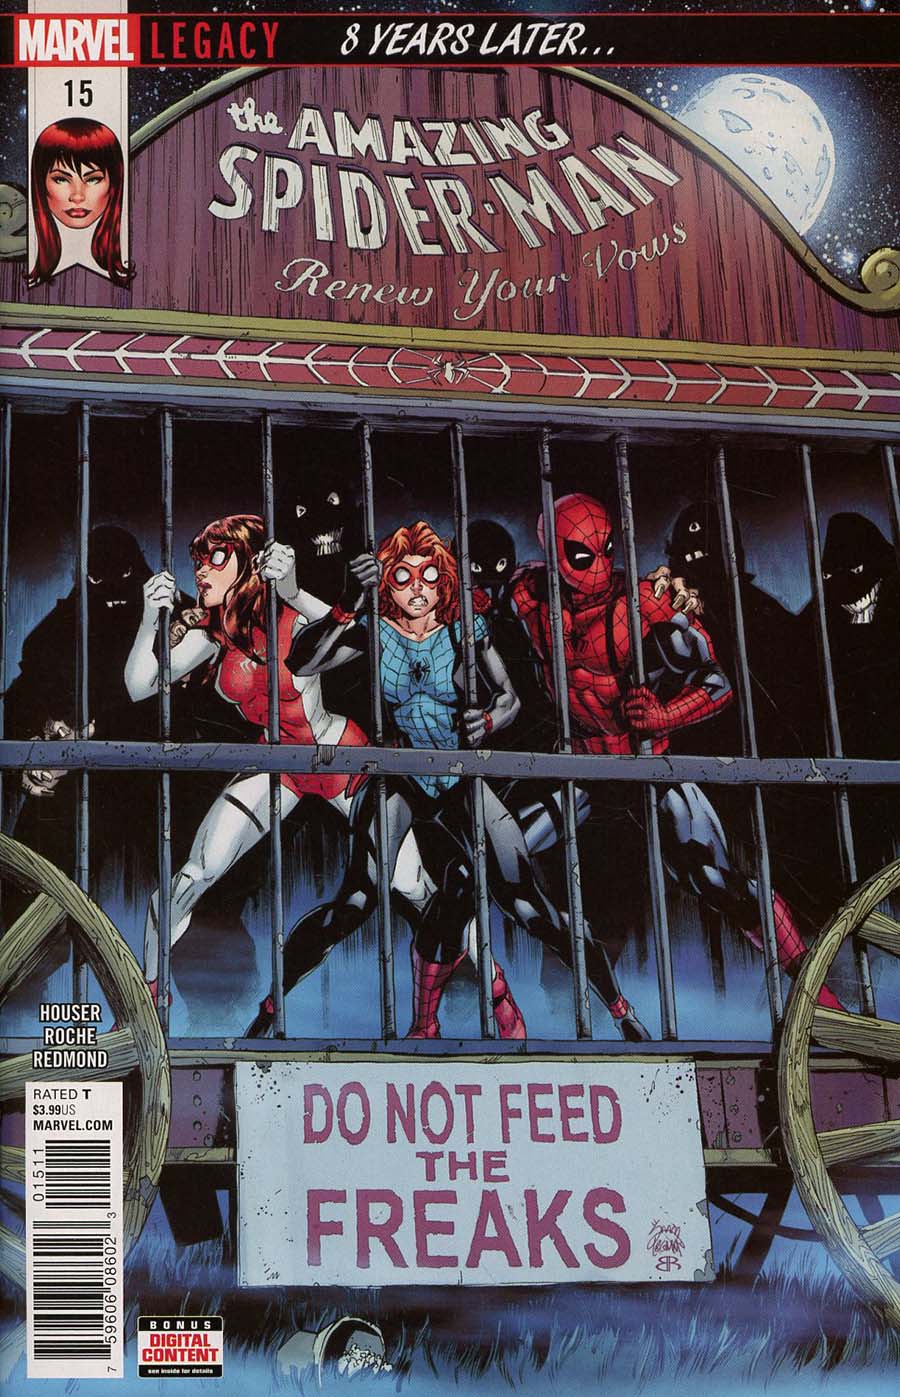 Amazing Spider-Man Renew Your Vows Vol 2 #15 (Marvel Legacy Tie-In)